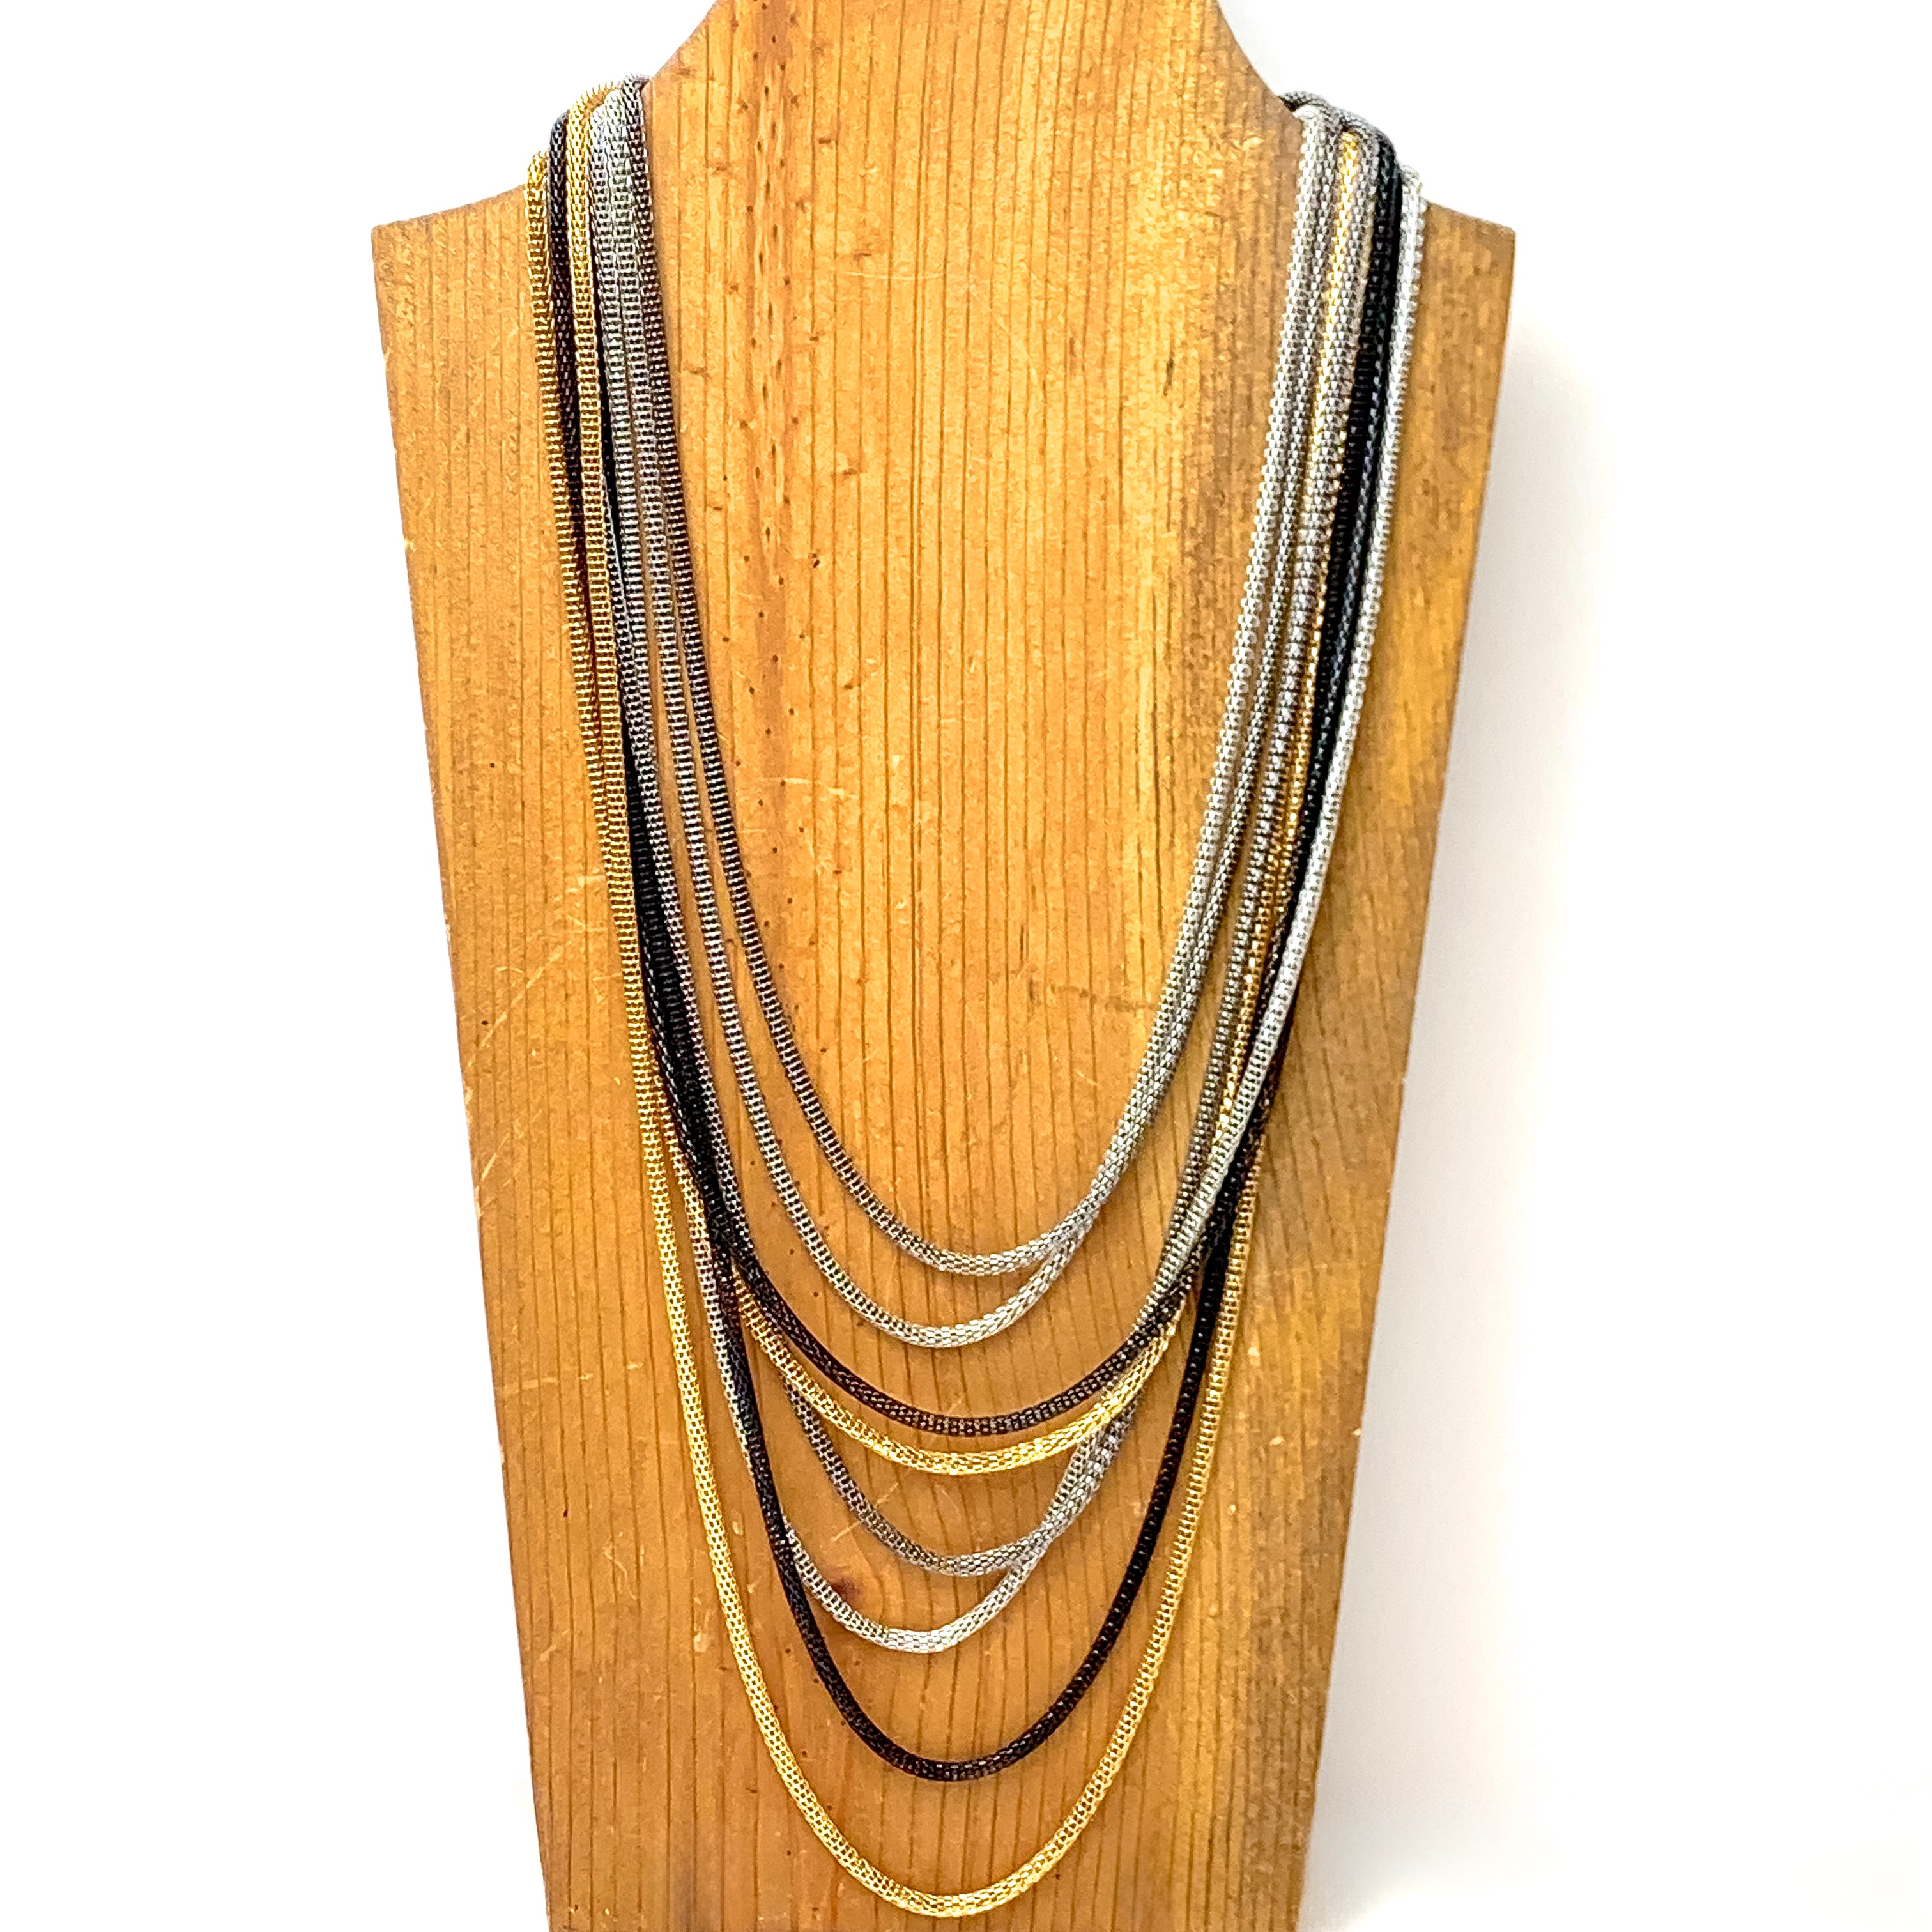 Urban Elegance Silver Tone Multistrand Mesh Chain Necklace - Giddy Up Glamour Boutique